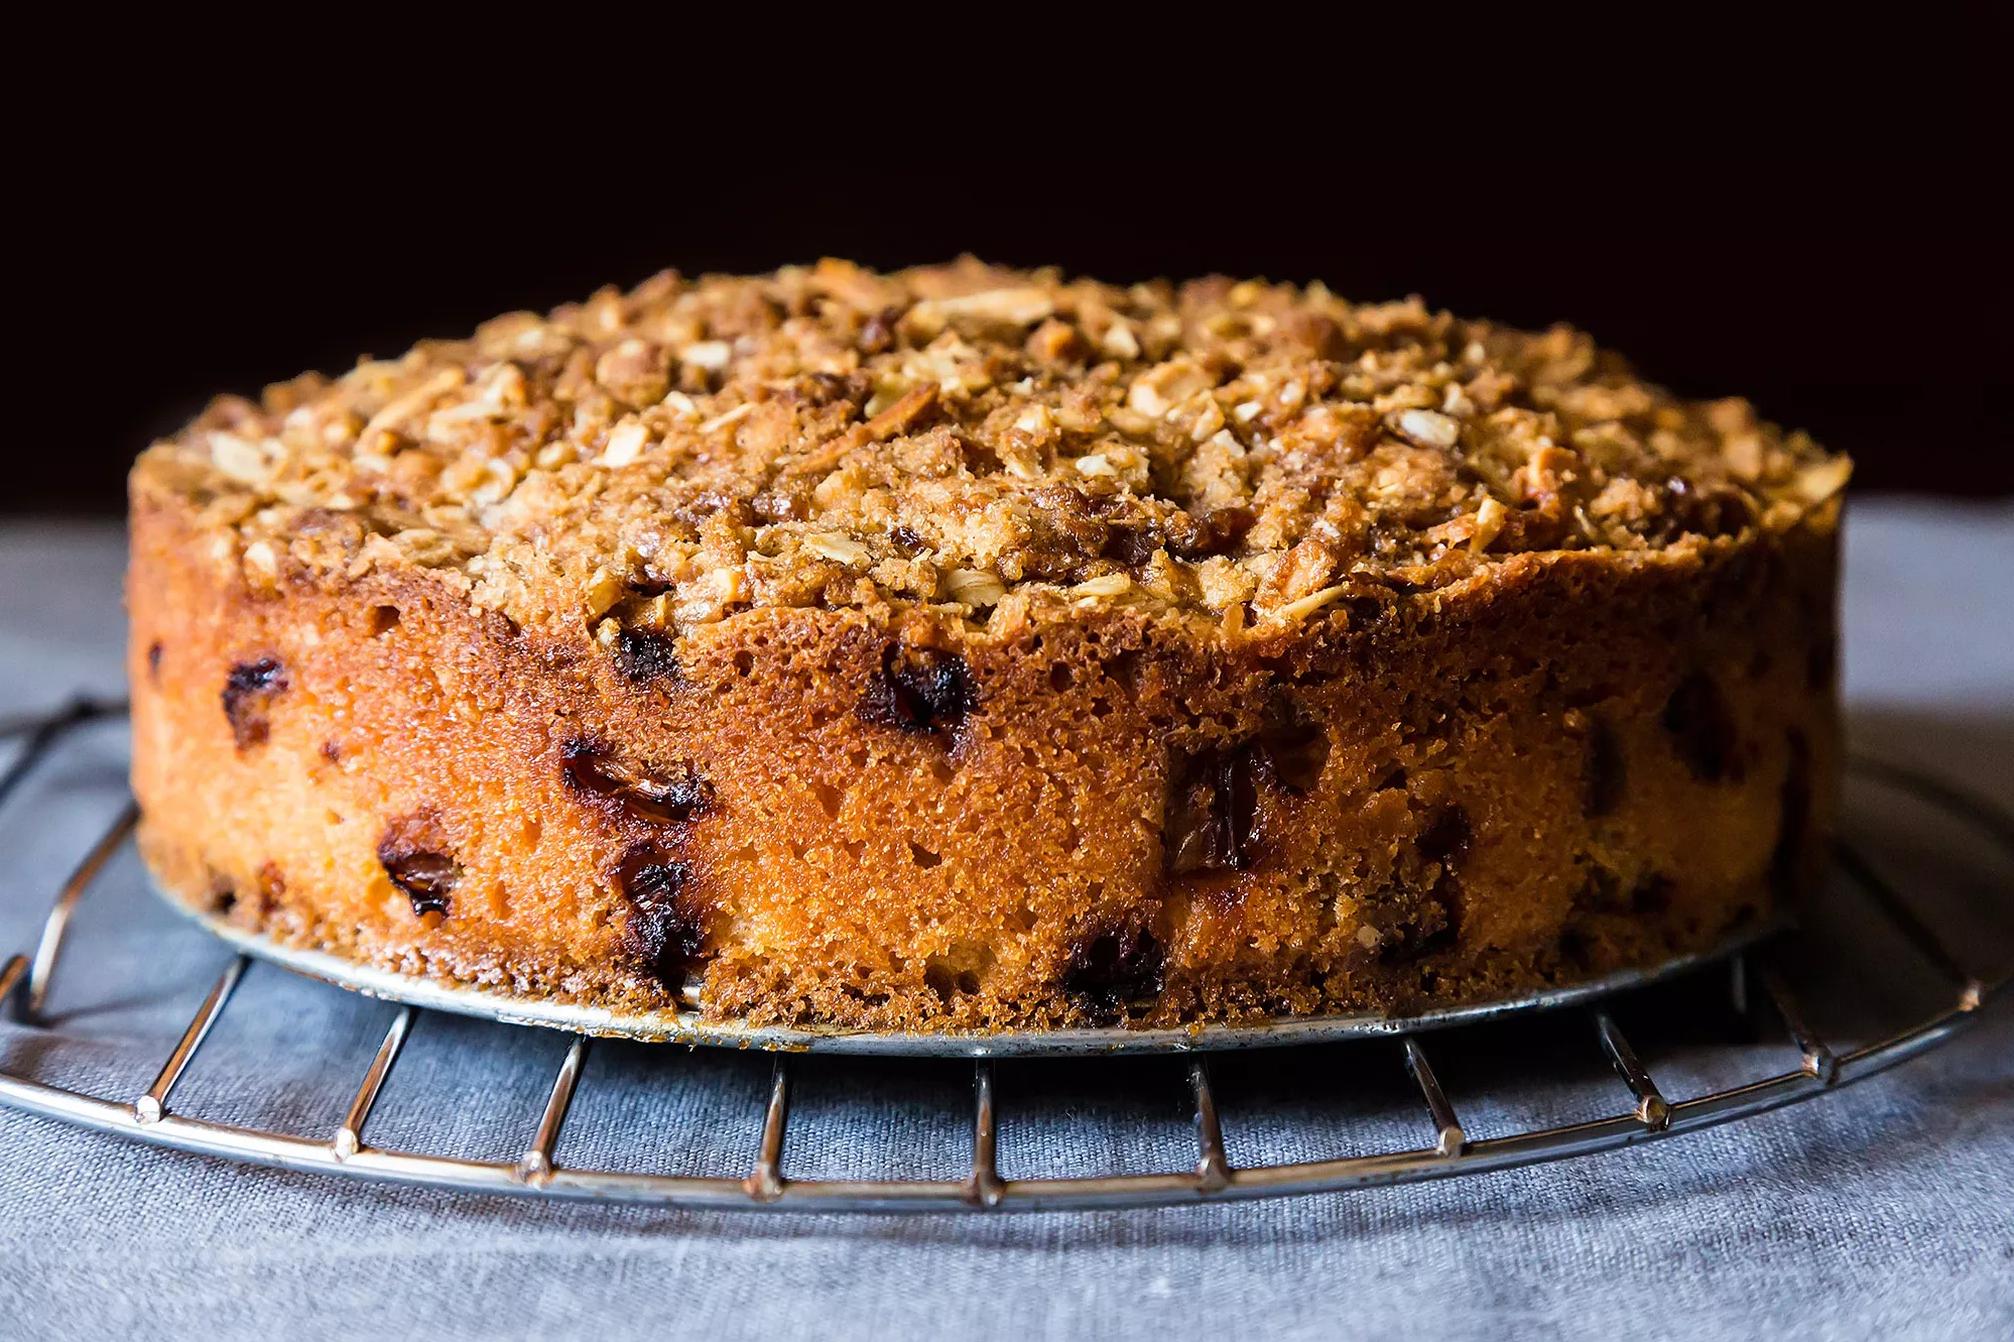  A deliciously moist and fluffy cake that is sure to impress your guests.